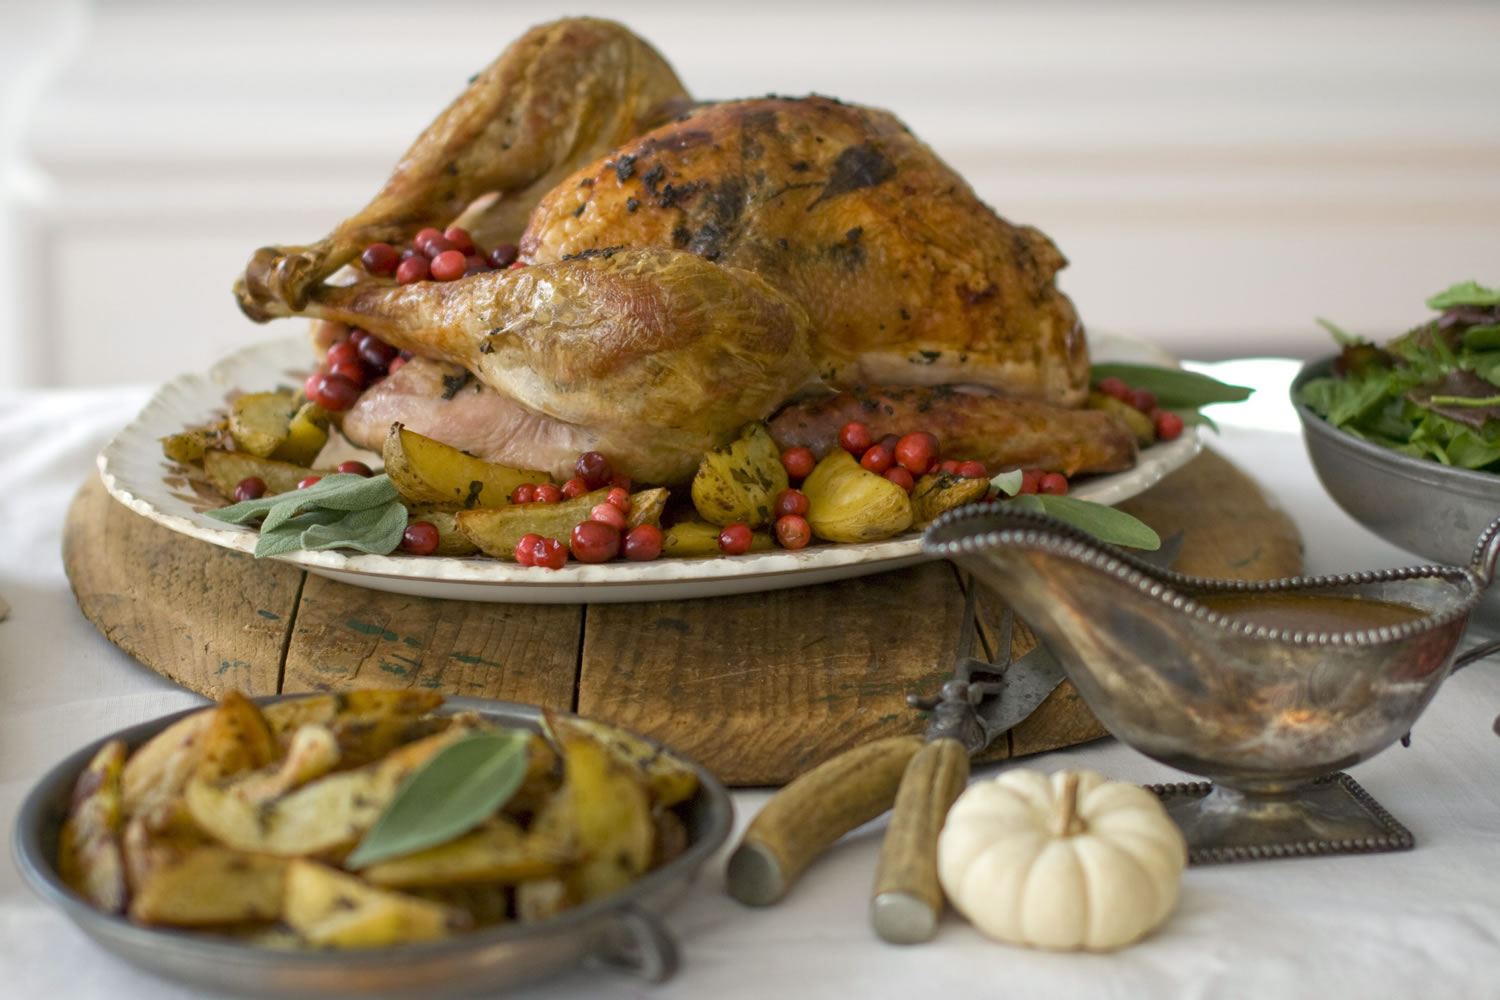 Confused about how to prepare your Thanksgiving turkey so it turns out as beautifully as this sage turkey?